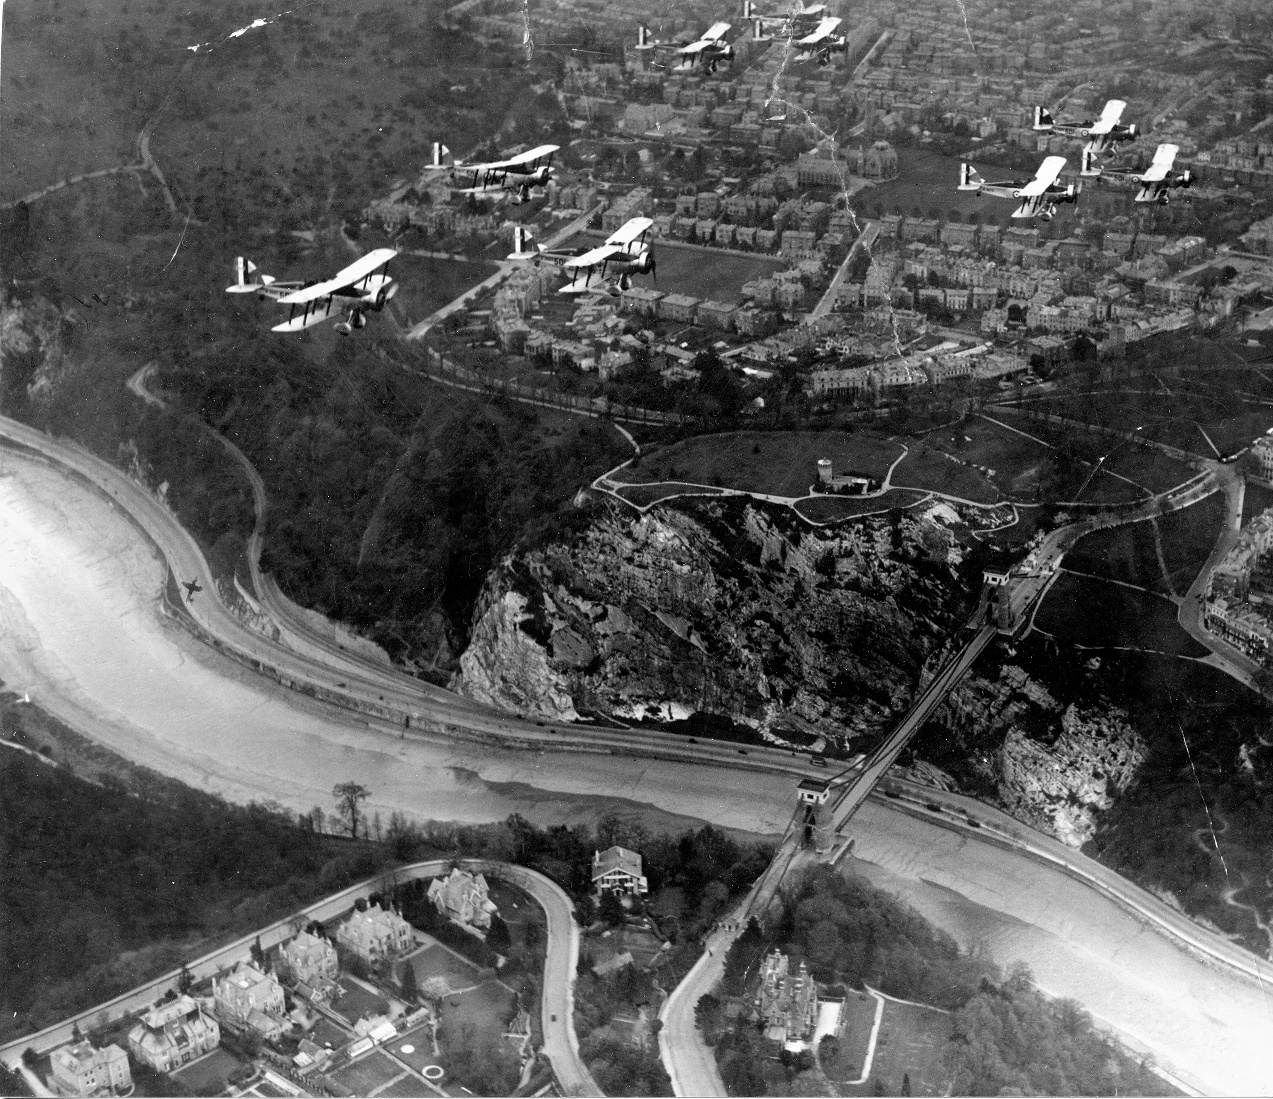 Wallaces of No 501 Squadron flying over the Clifton Suspension Bridge